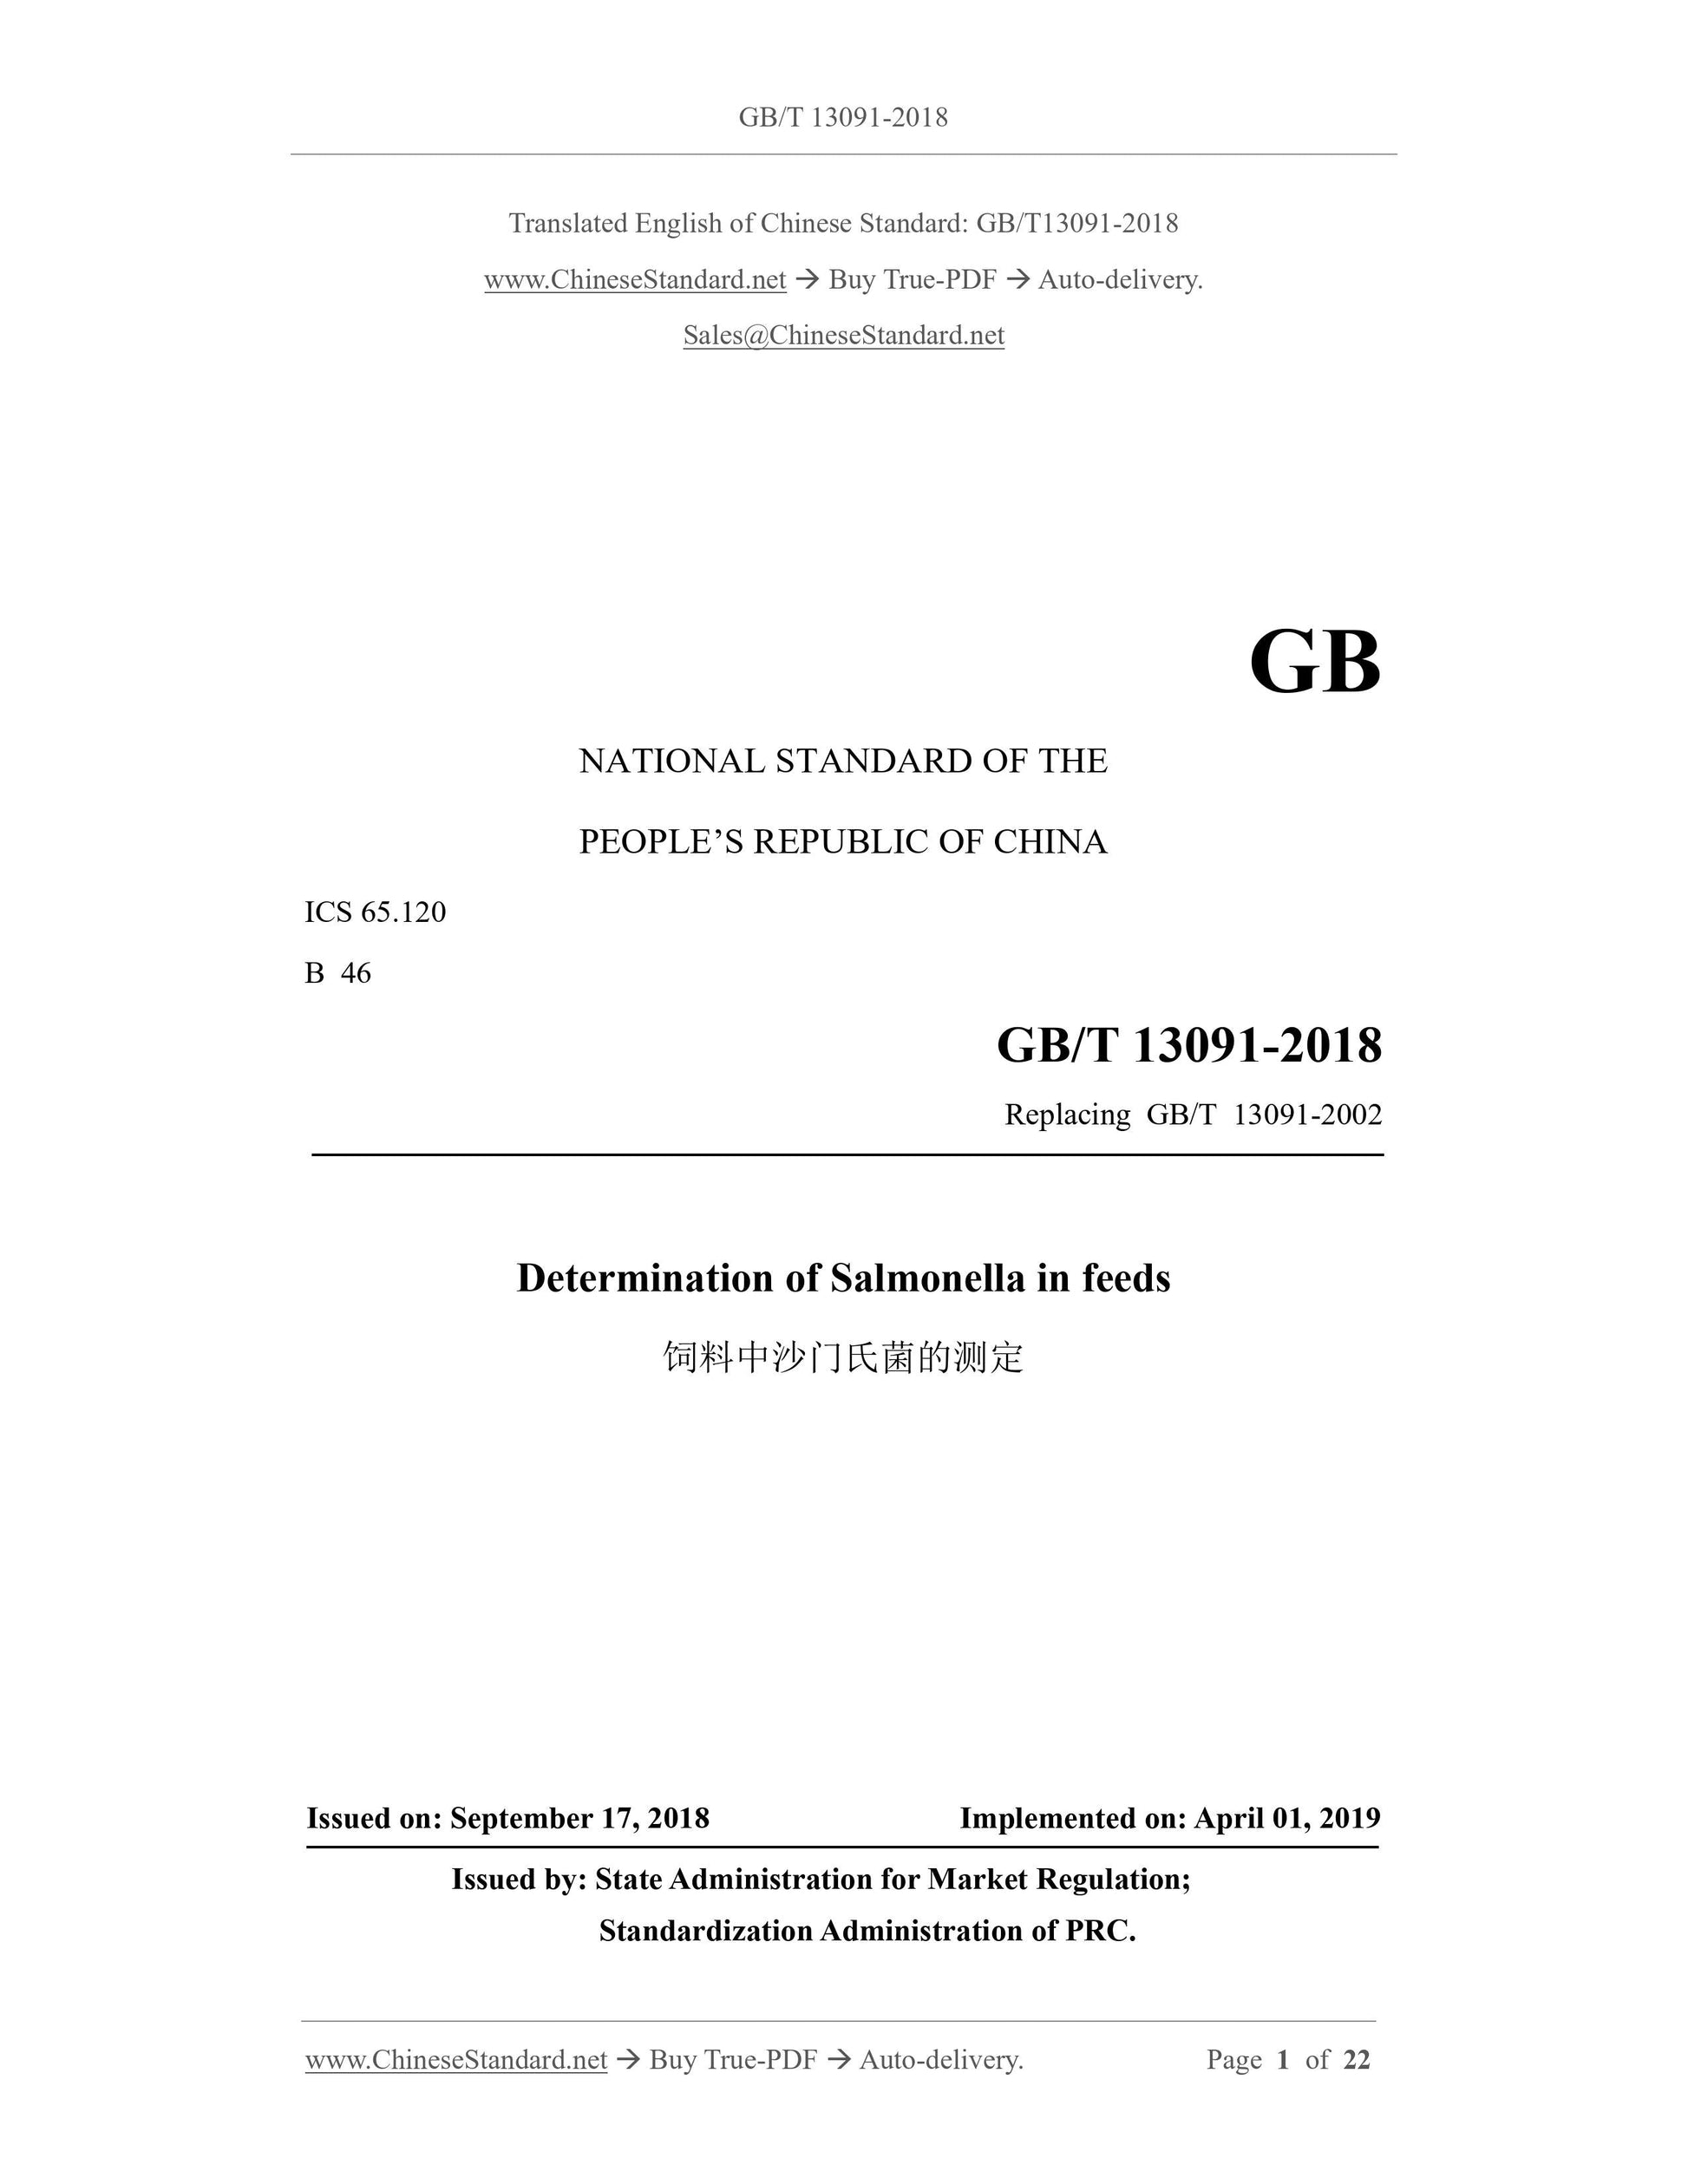 GB/T 13091-2018 Page 1